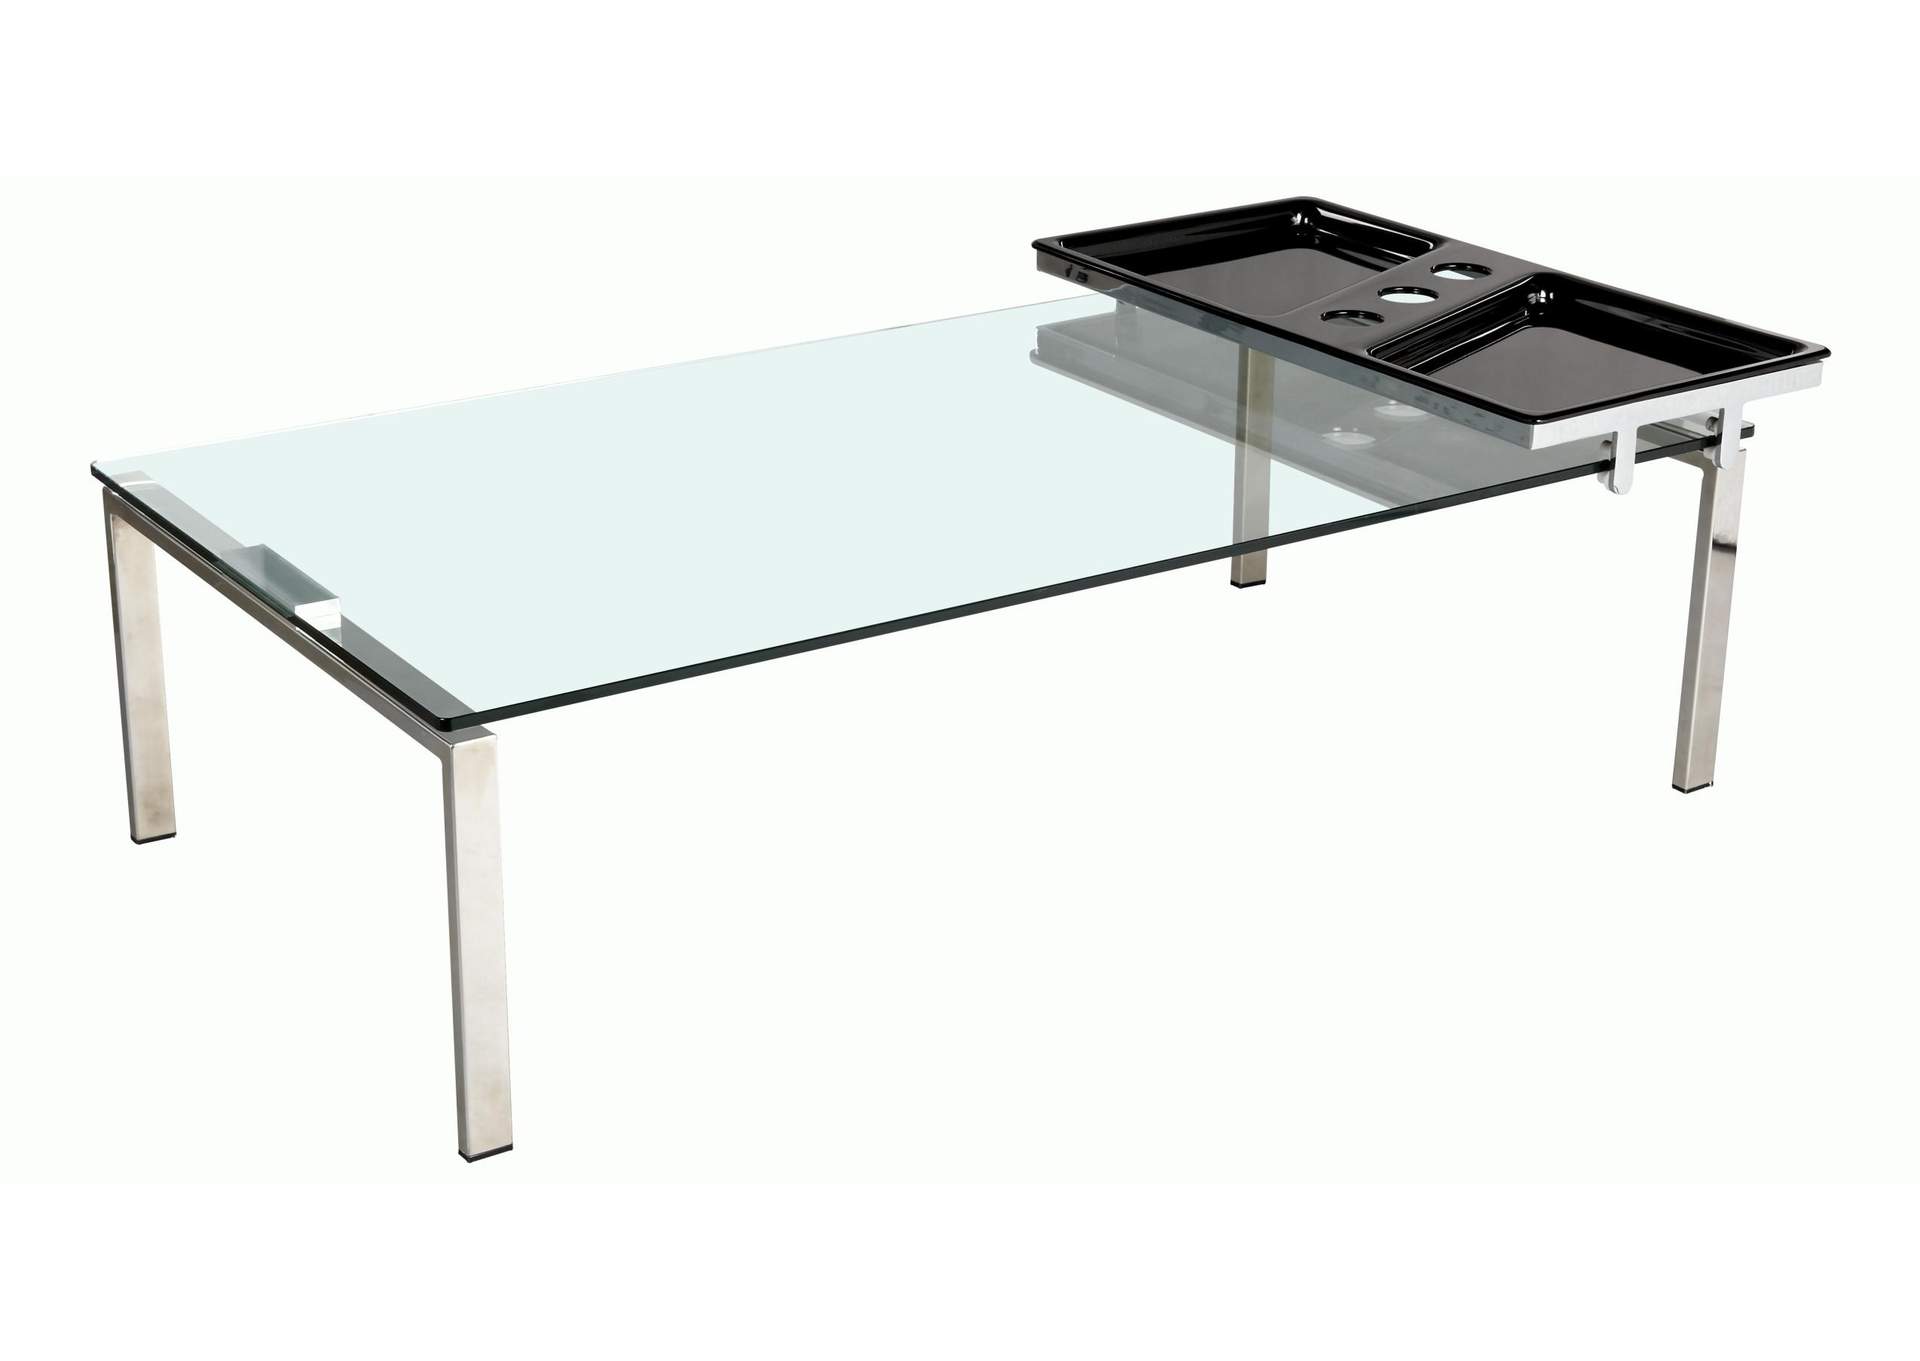 Contemporary 30"x 55" Glass Top Cocktail Table w/ Acrylic Motion Tray,Chintaly Imports